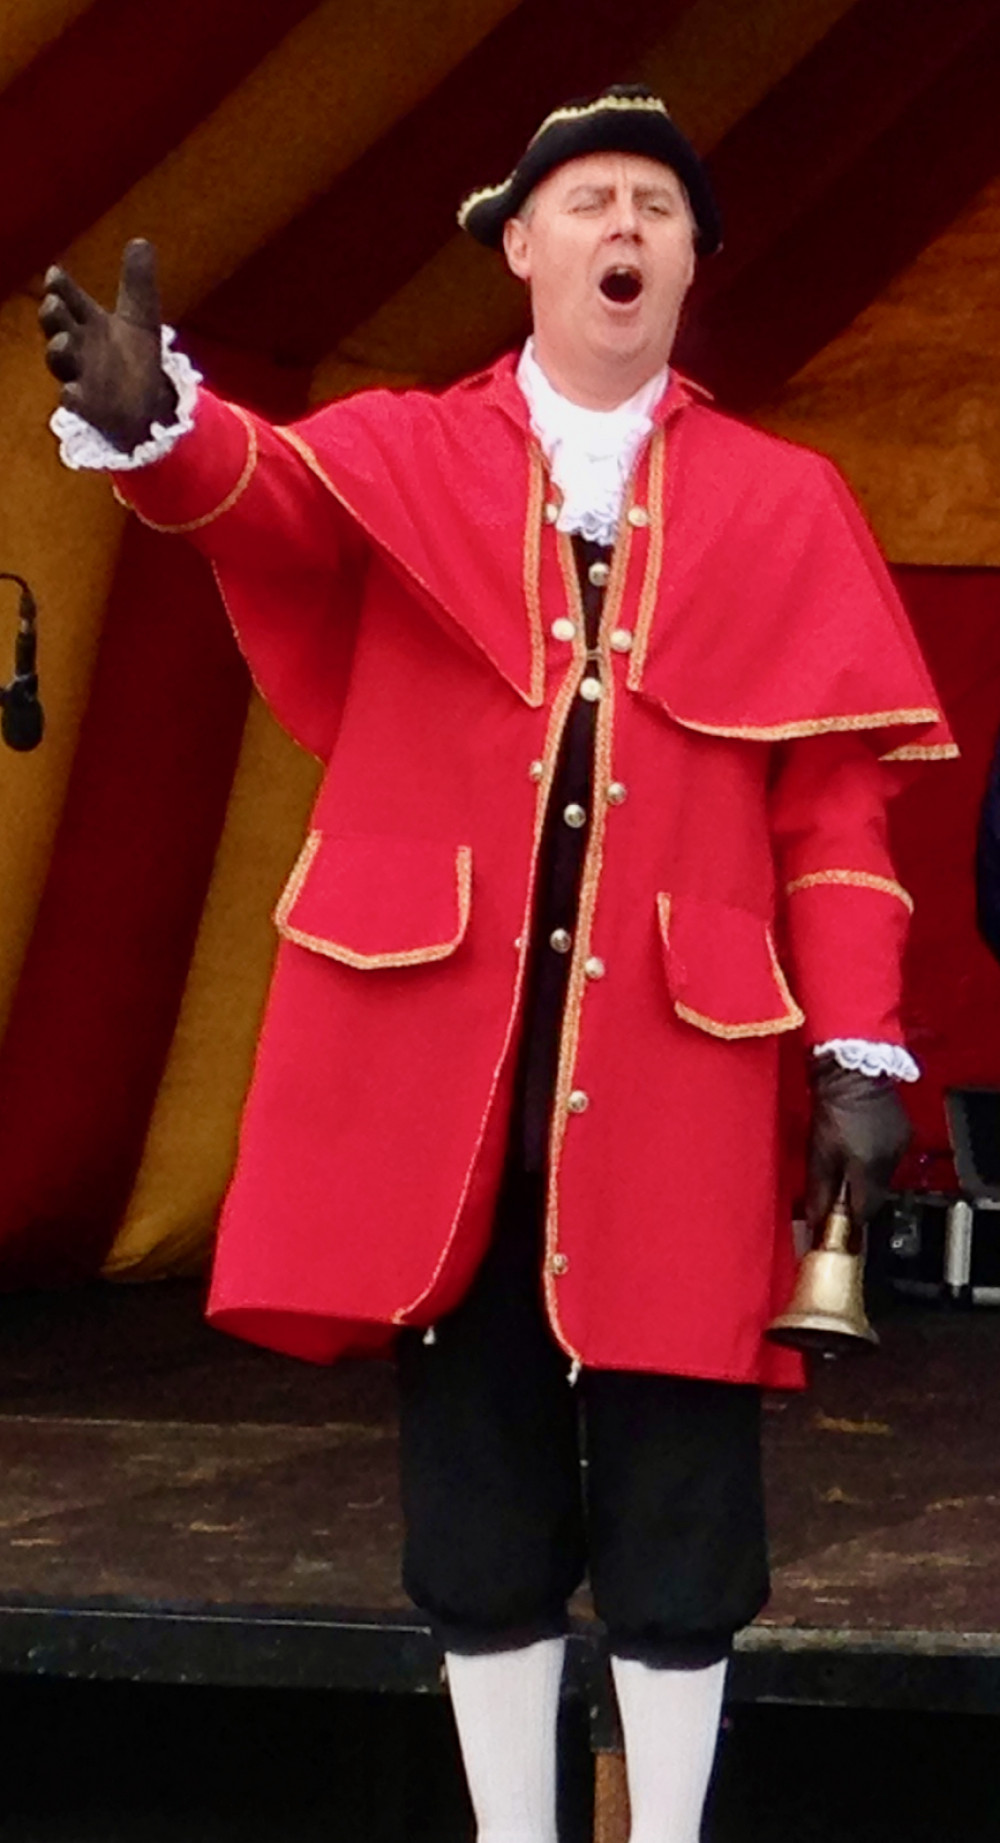 The Queen's Platinum Jubilee weekend events will be kicked off by the Cowbridge Town Crier